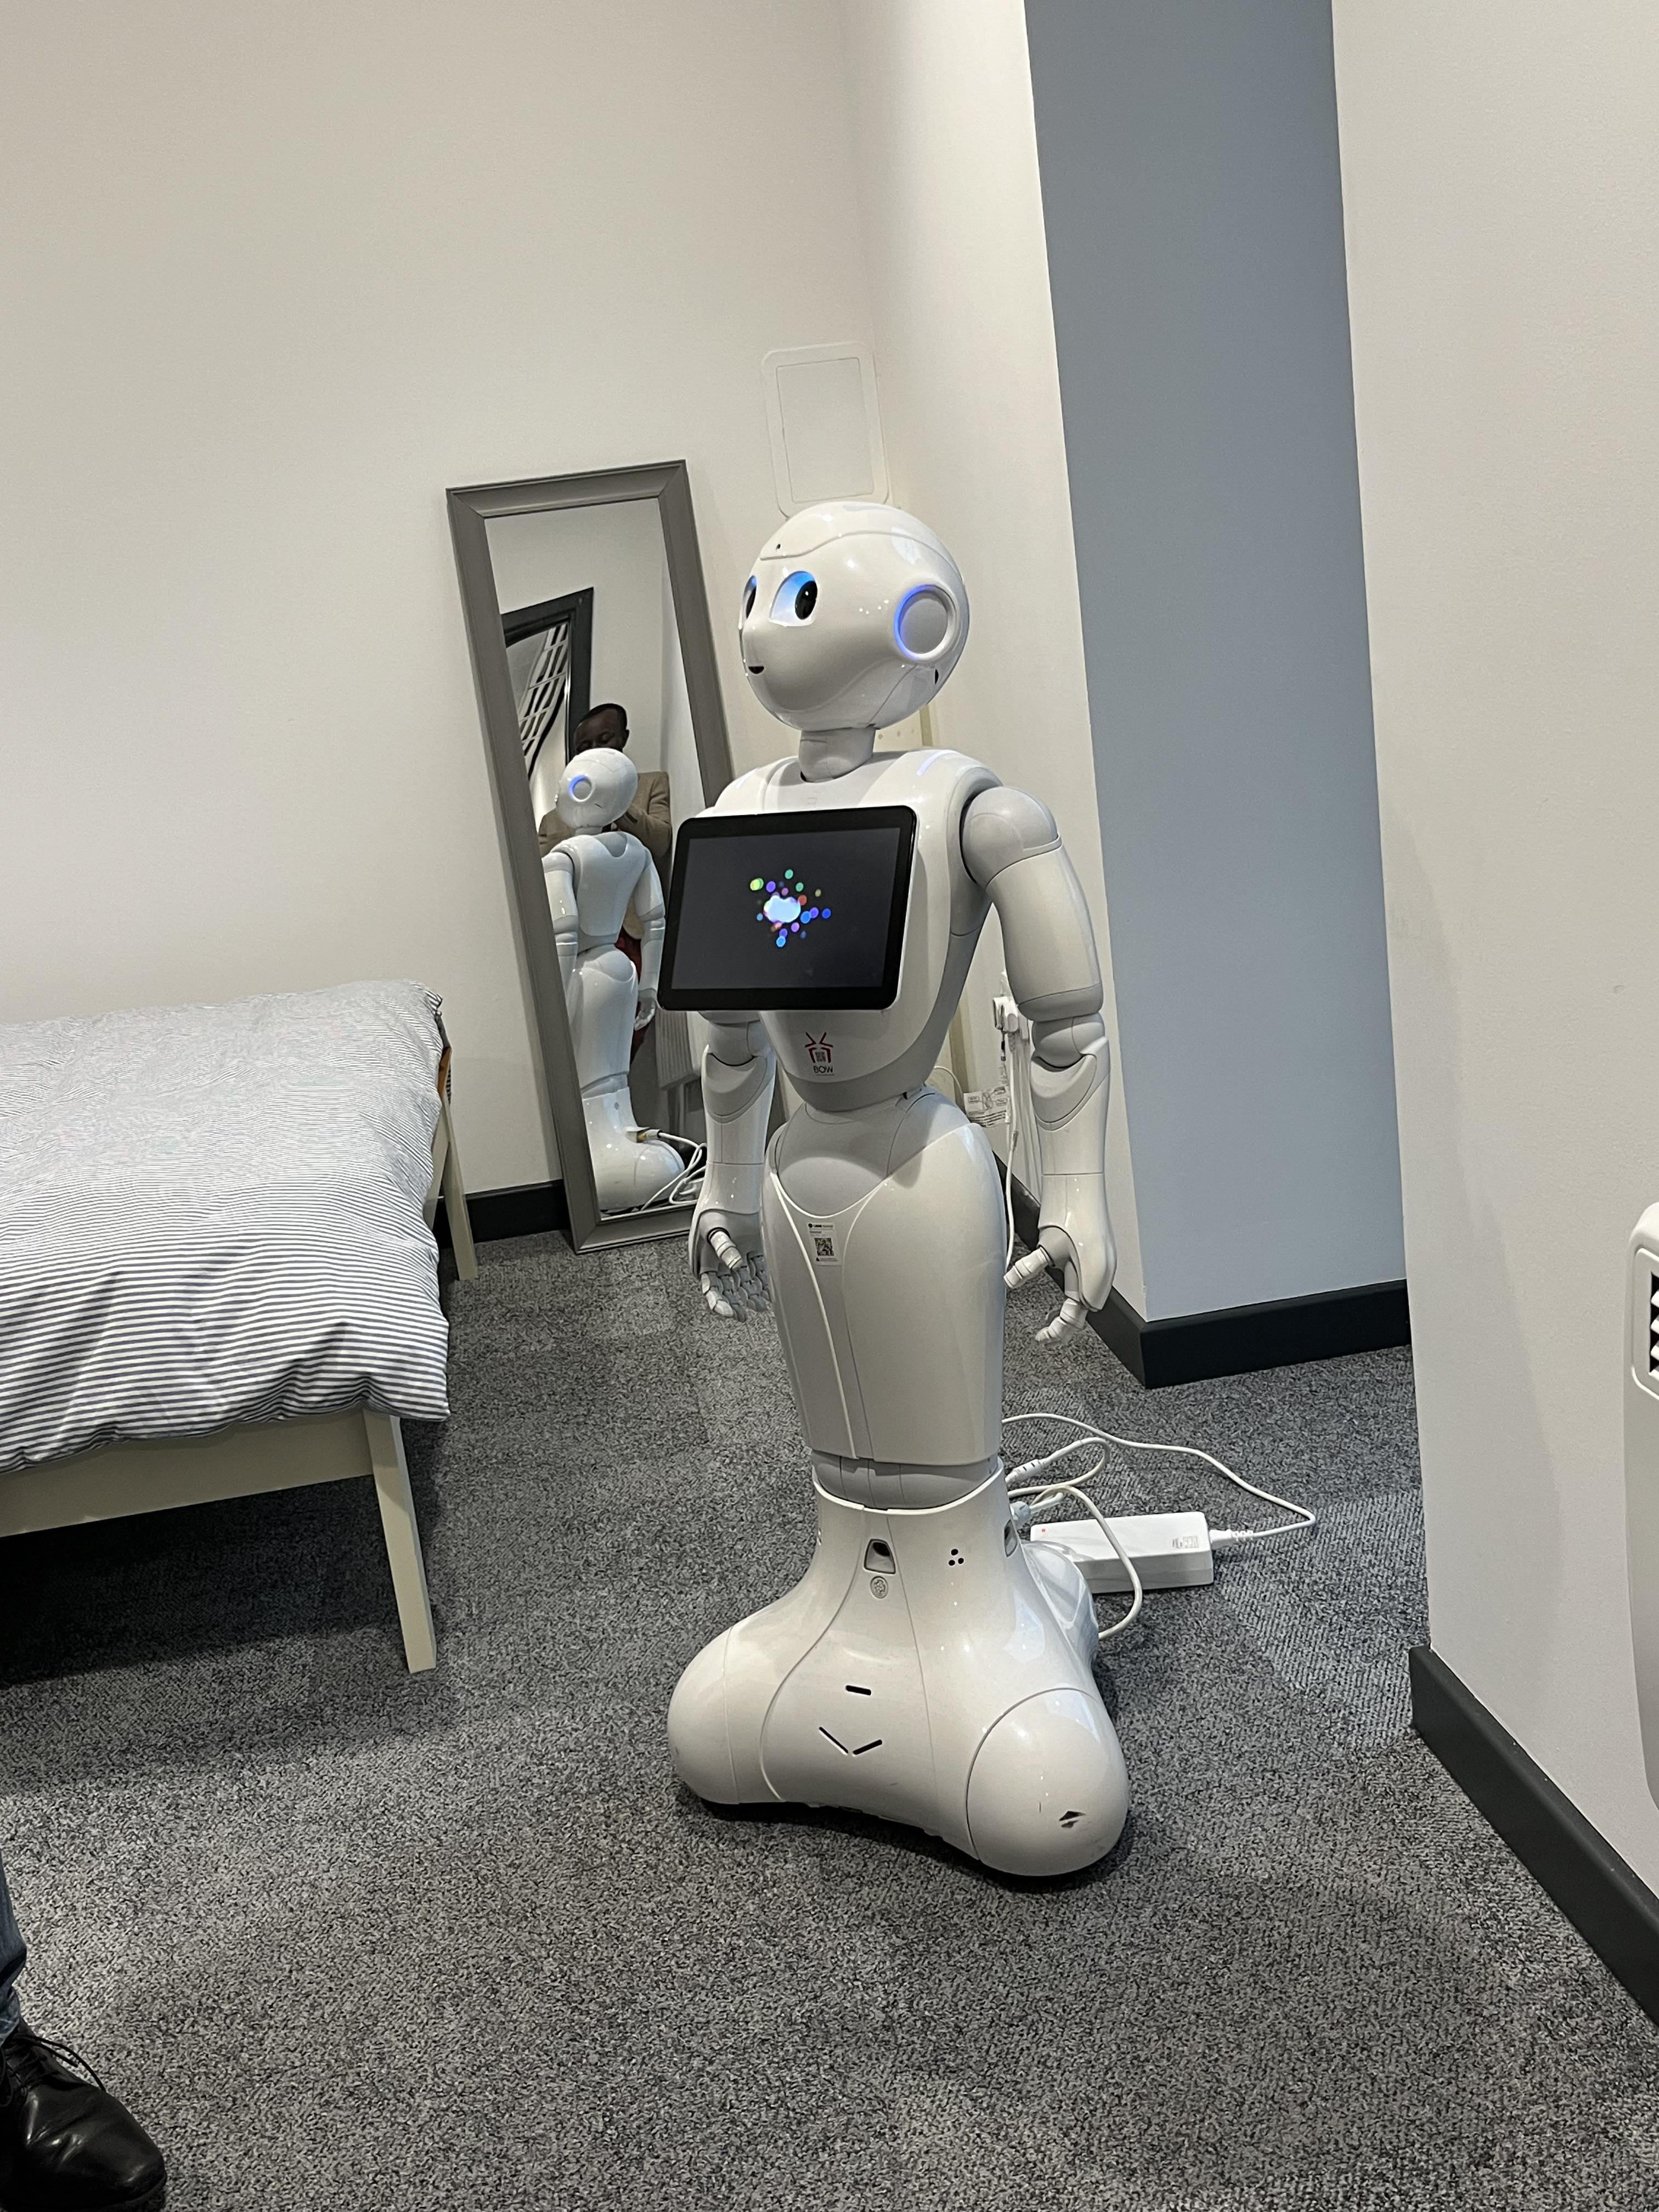 A standing robot with a tablet / screen on the chest